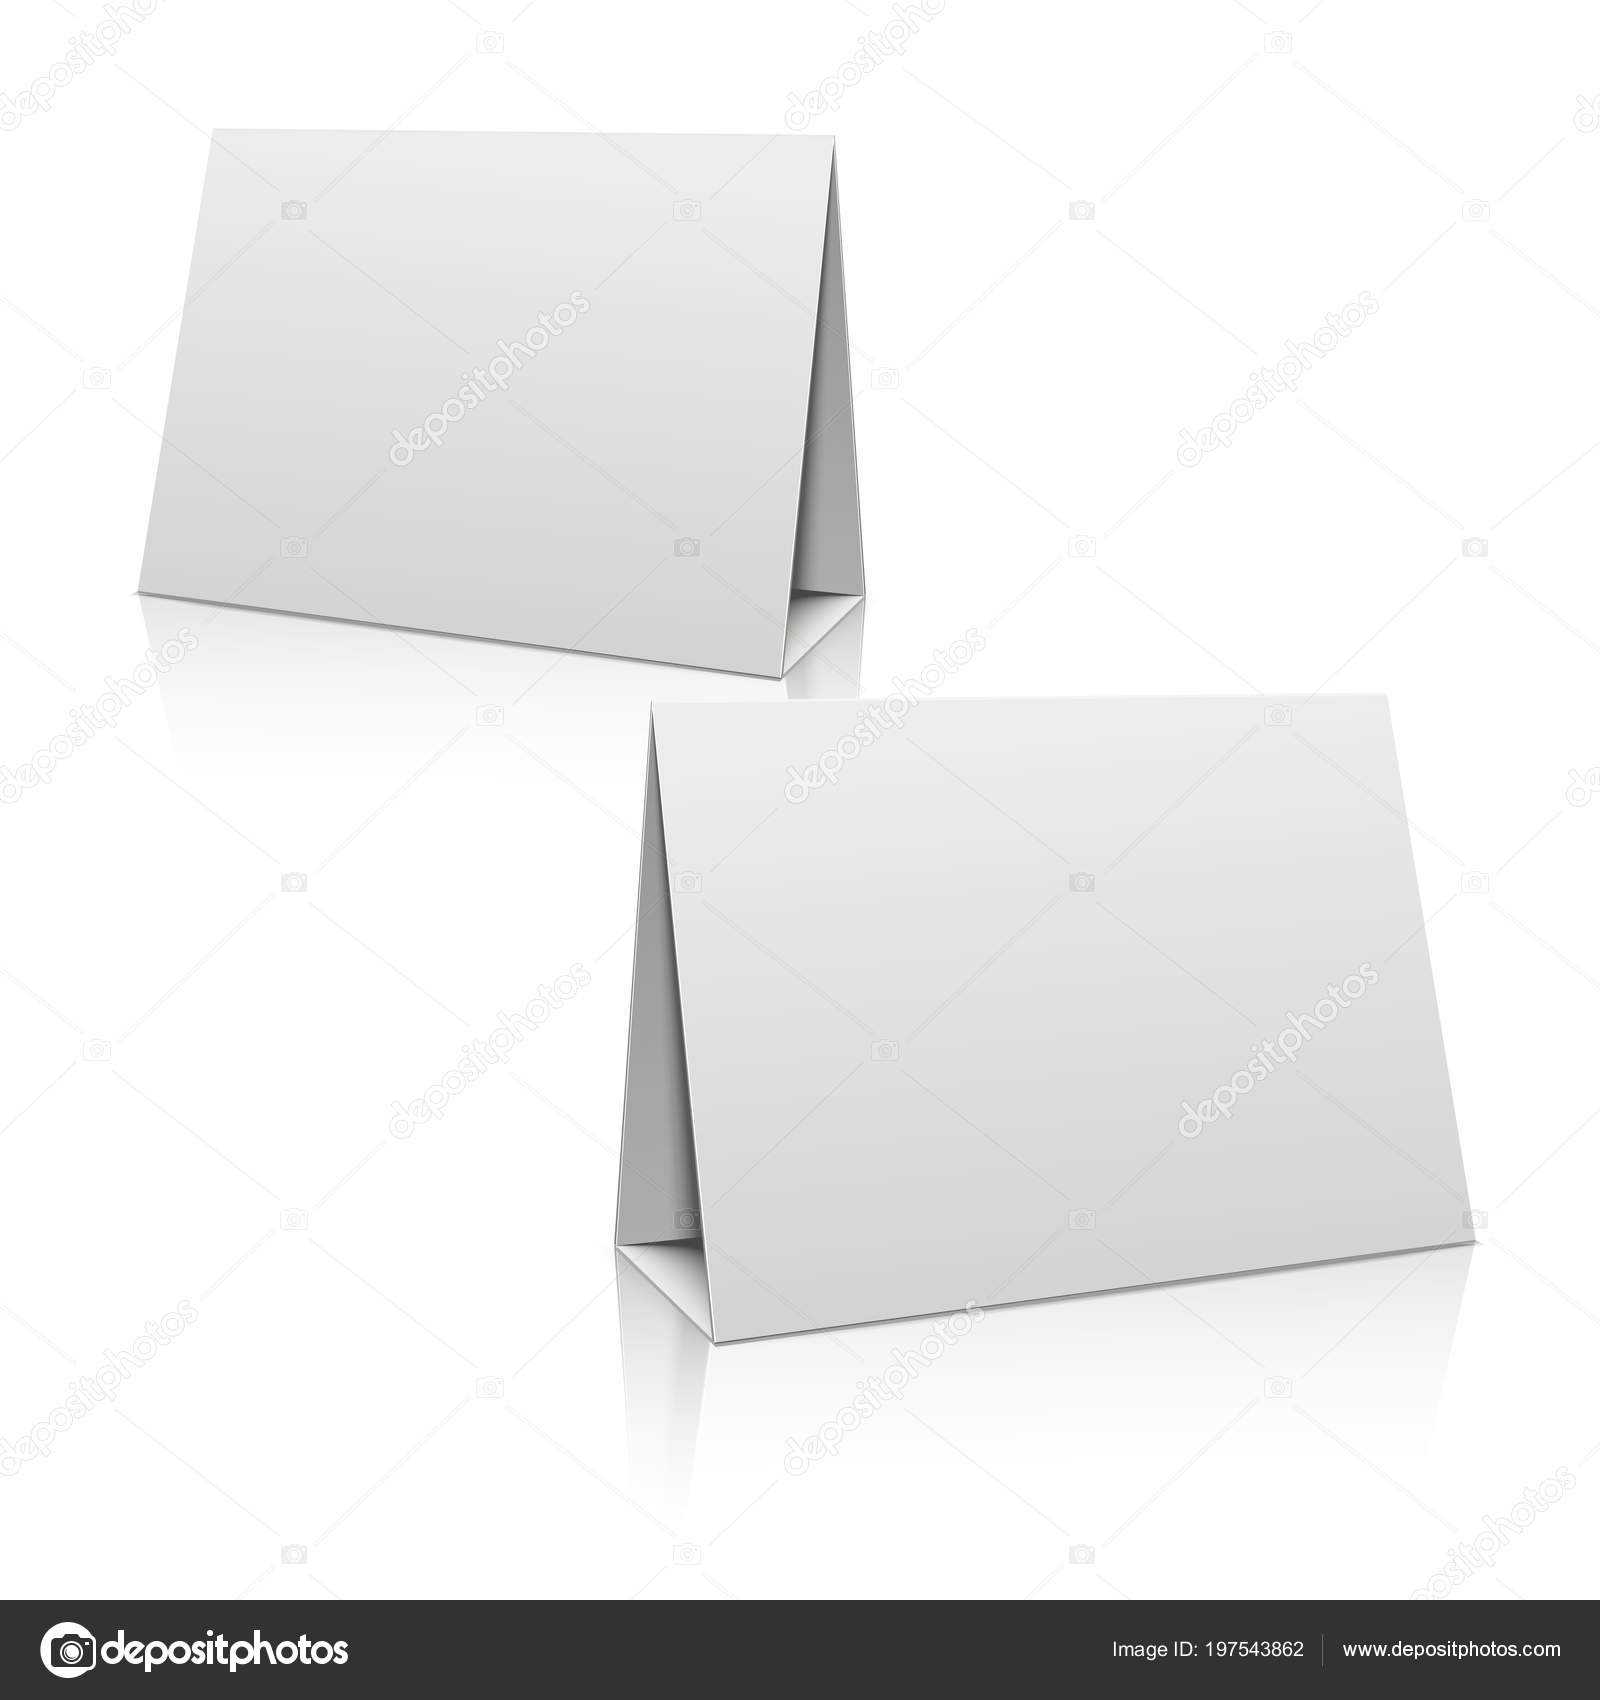 Paper Stand Template | Blank White Paper Stand Table Holder Regarding Card Stand Template